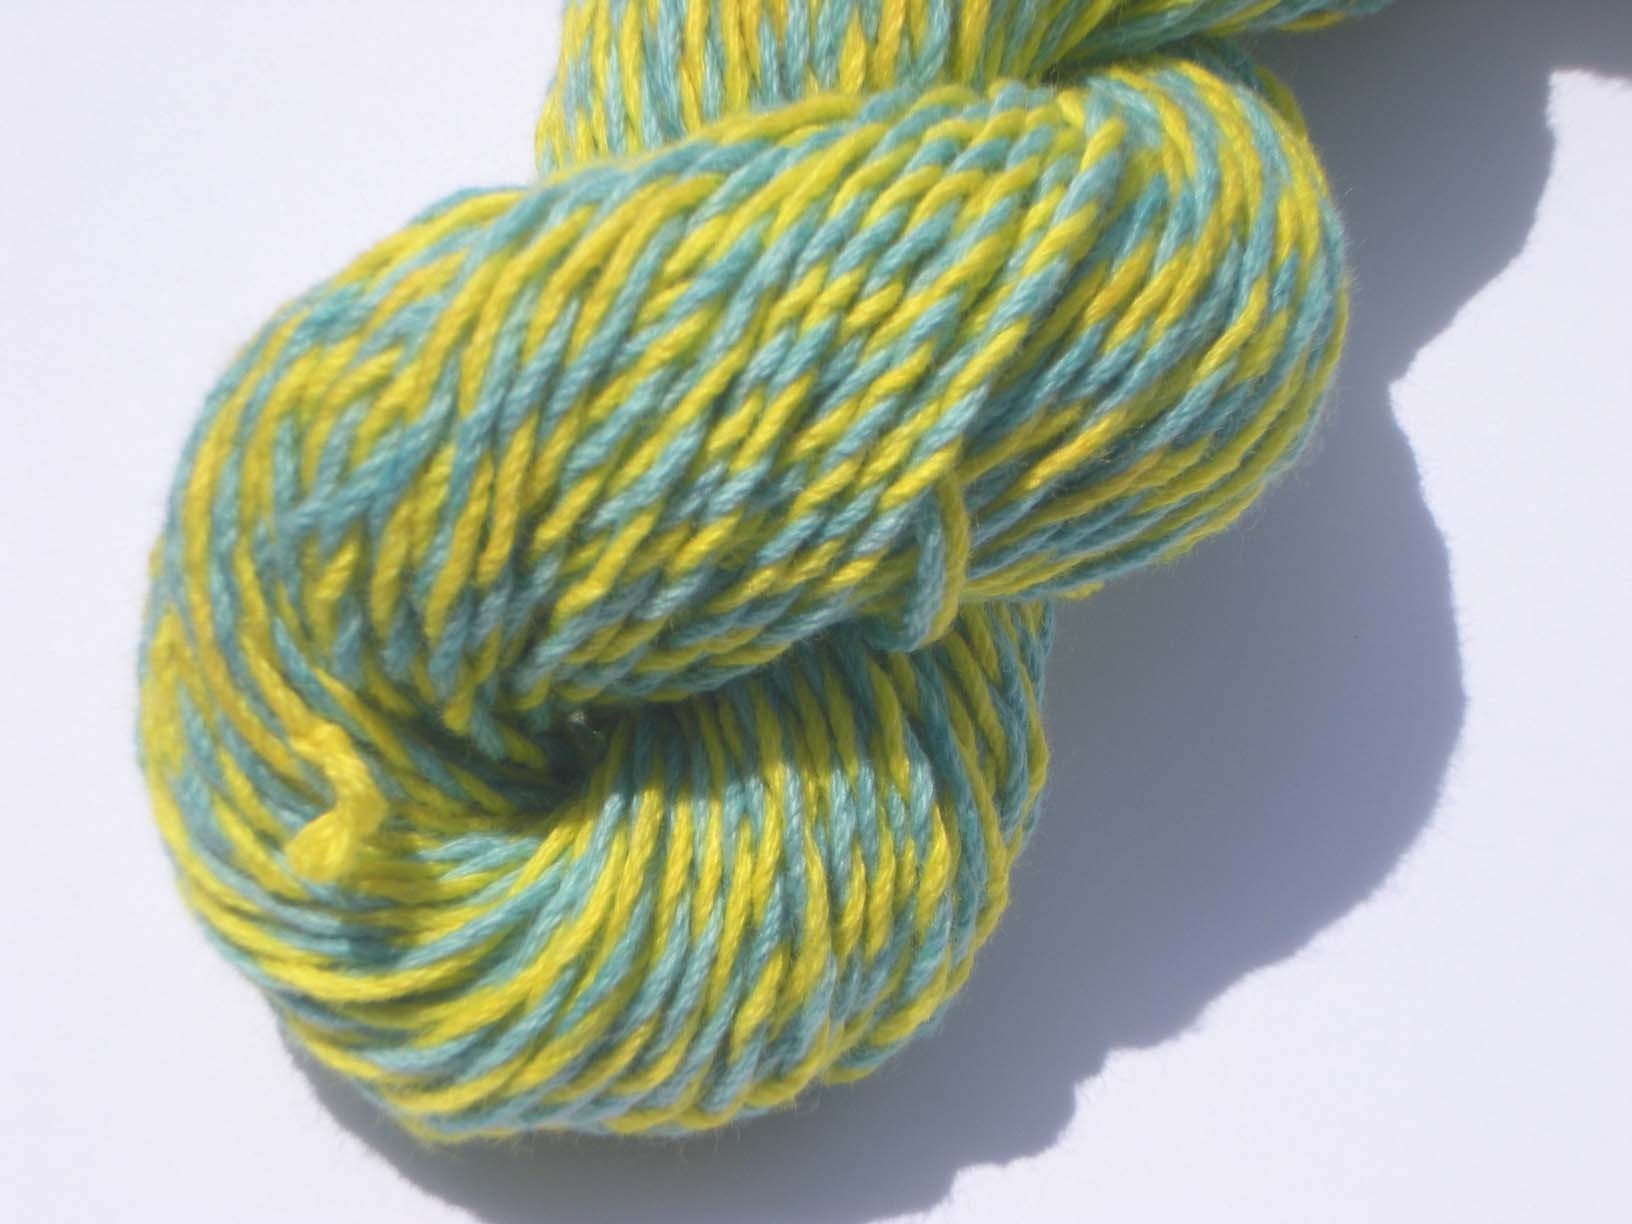 Hand Dyed, Recycled, Respun Cotton Yarn, Worsted Weight, 134 Yards No. 105